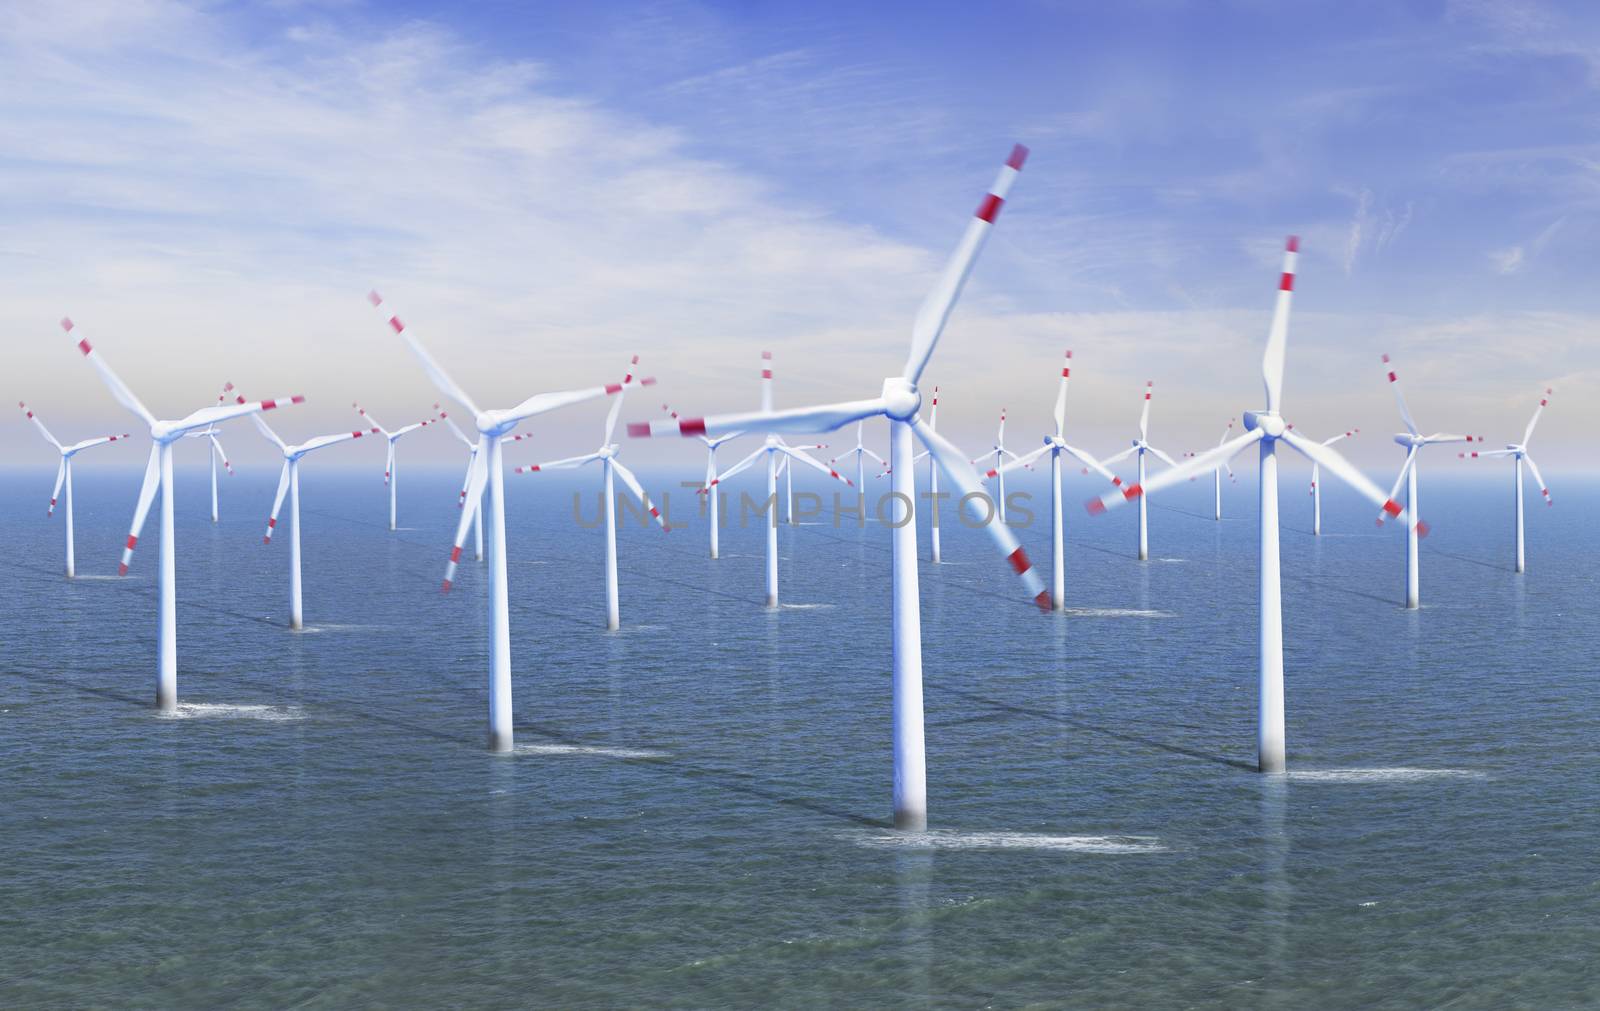 Elevated view of a Wind farm at sea